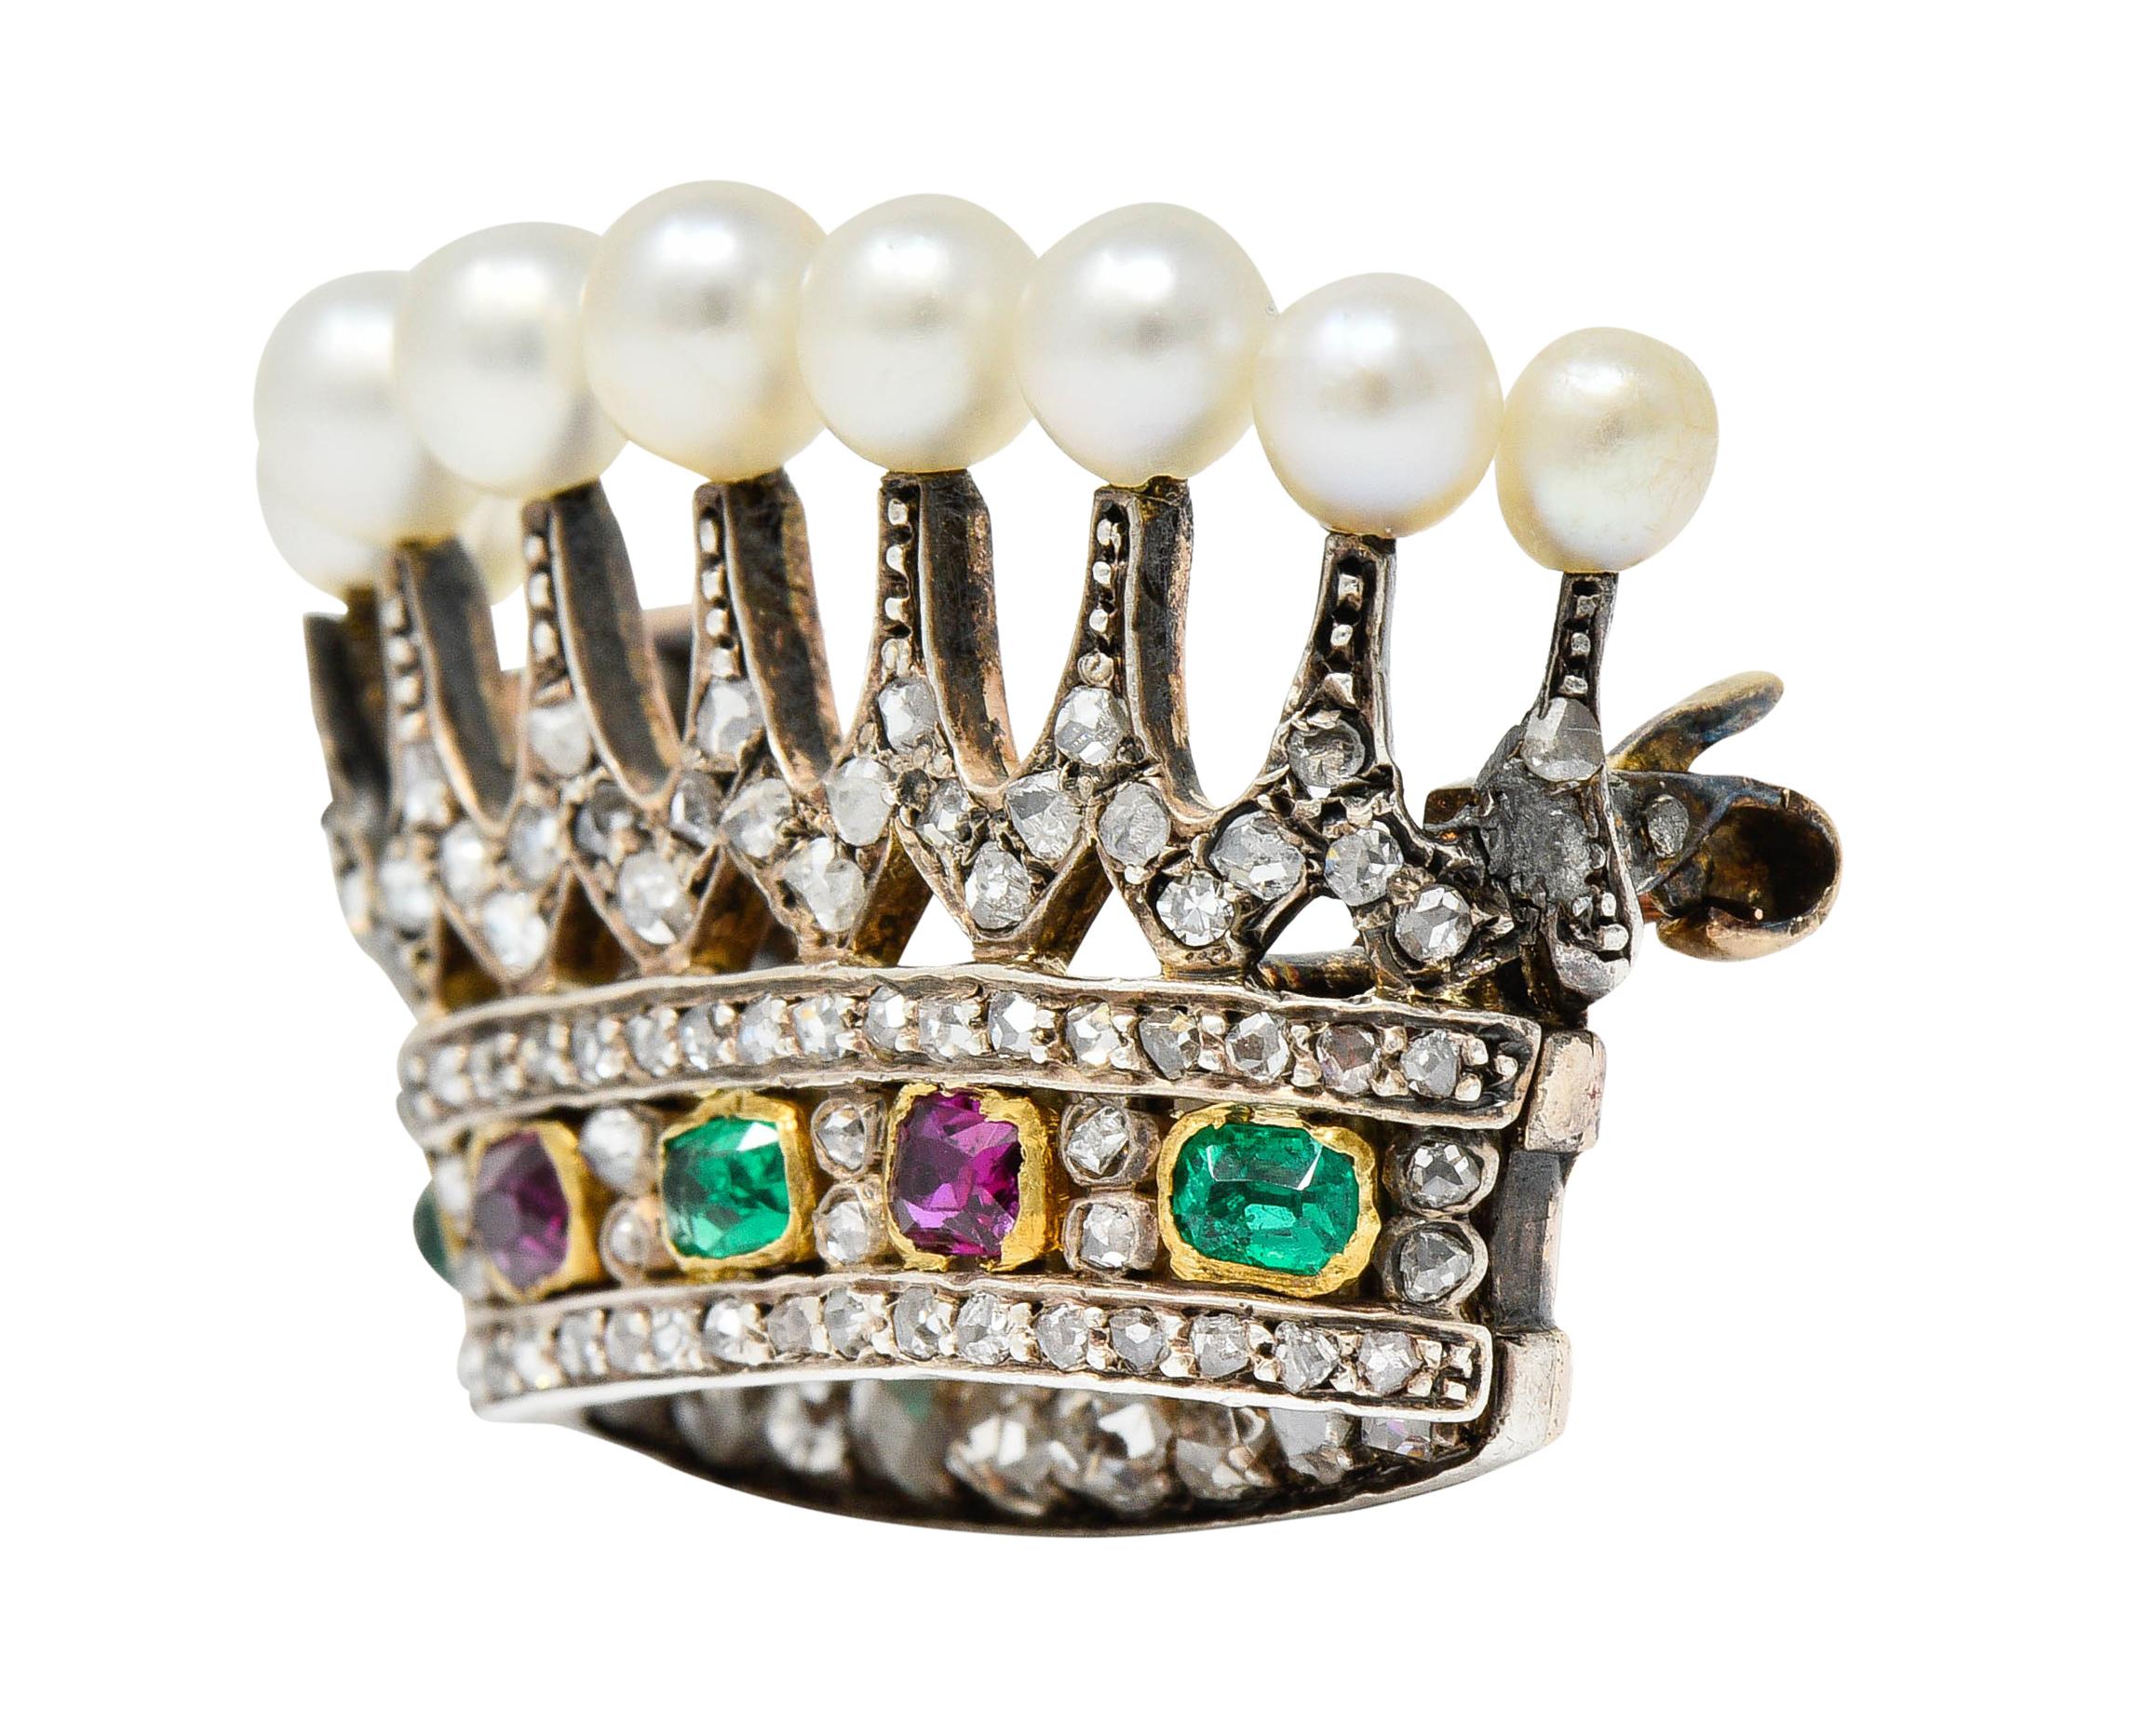 Brooch is designed as a silver-topped crown with each tine topped by 4.0 mm round pearl

Very well-matched with white body color and very good luster

With a row of emerald cut emeralds and rubies, alternating, and bezel set in gold

Vibrantly